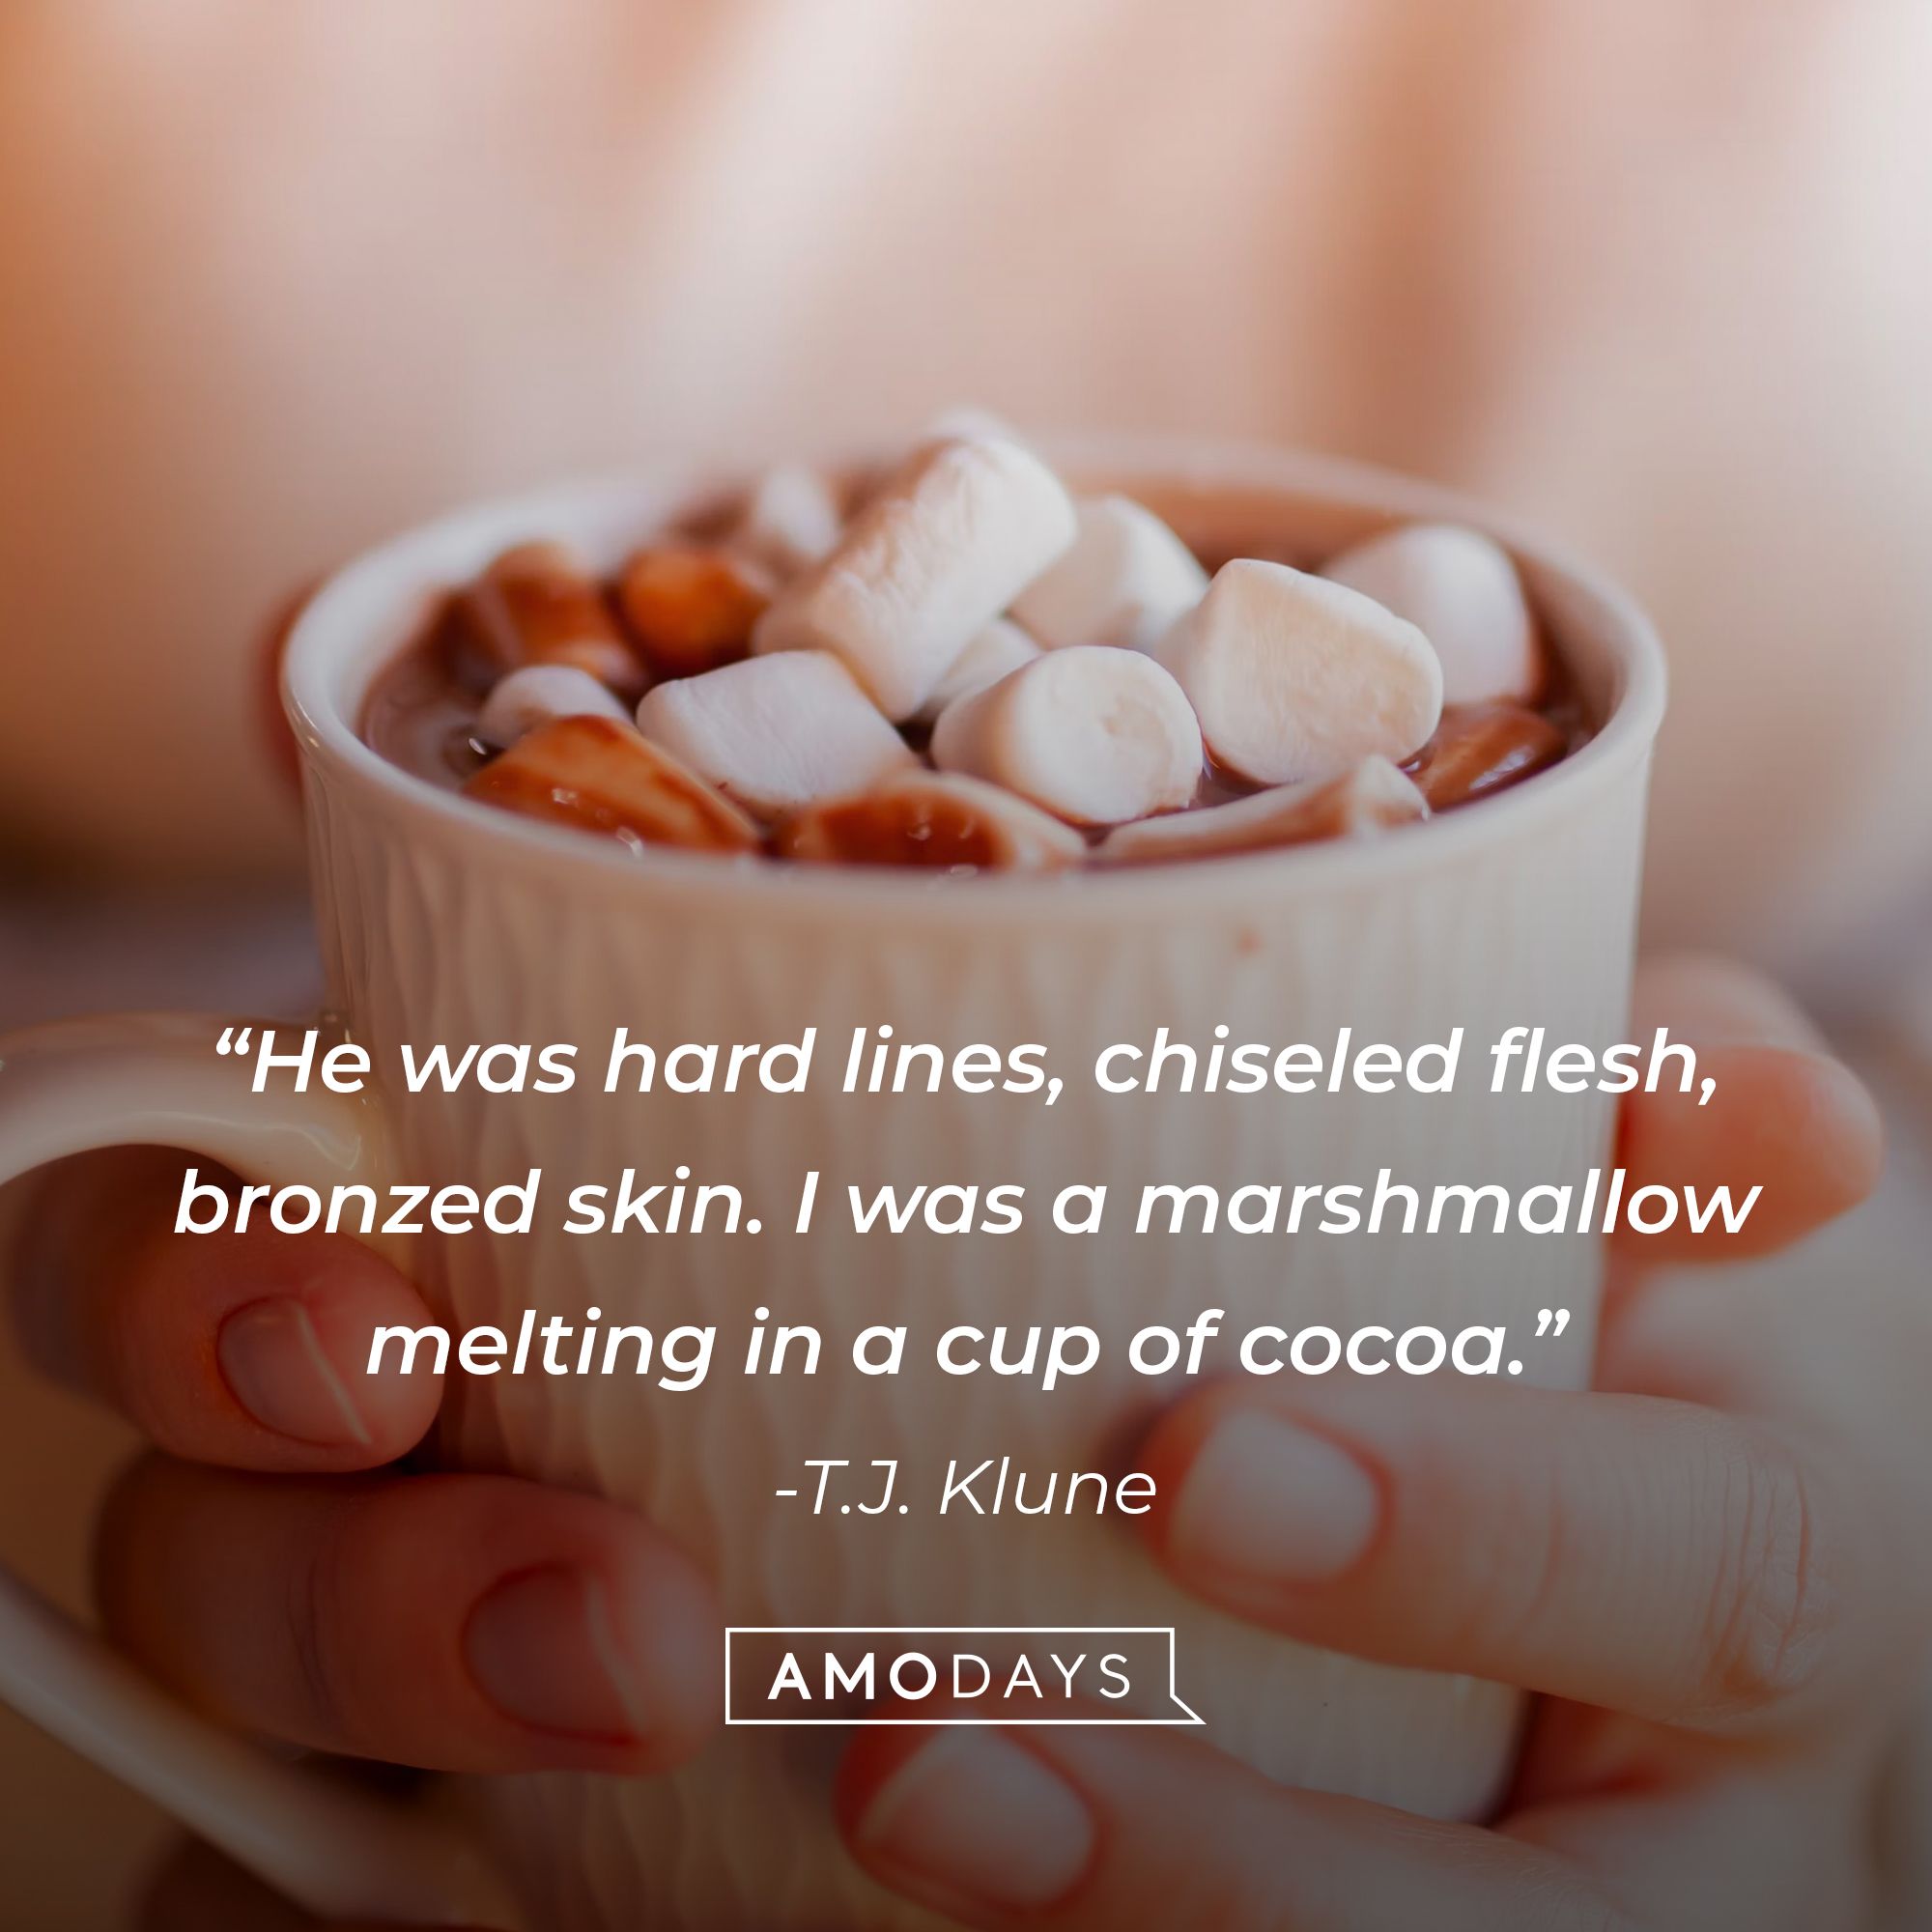 T.J. Klune's quote: "He was hard lines, chiseled flesh, bronzed skin. I was a marshmallow melting in a cup of cocoa." Source: Quotestats